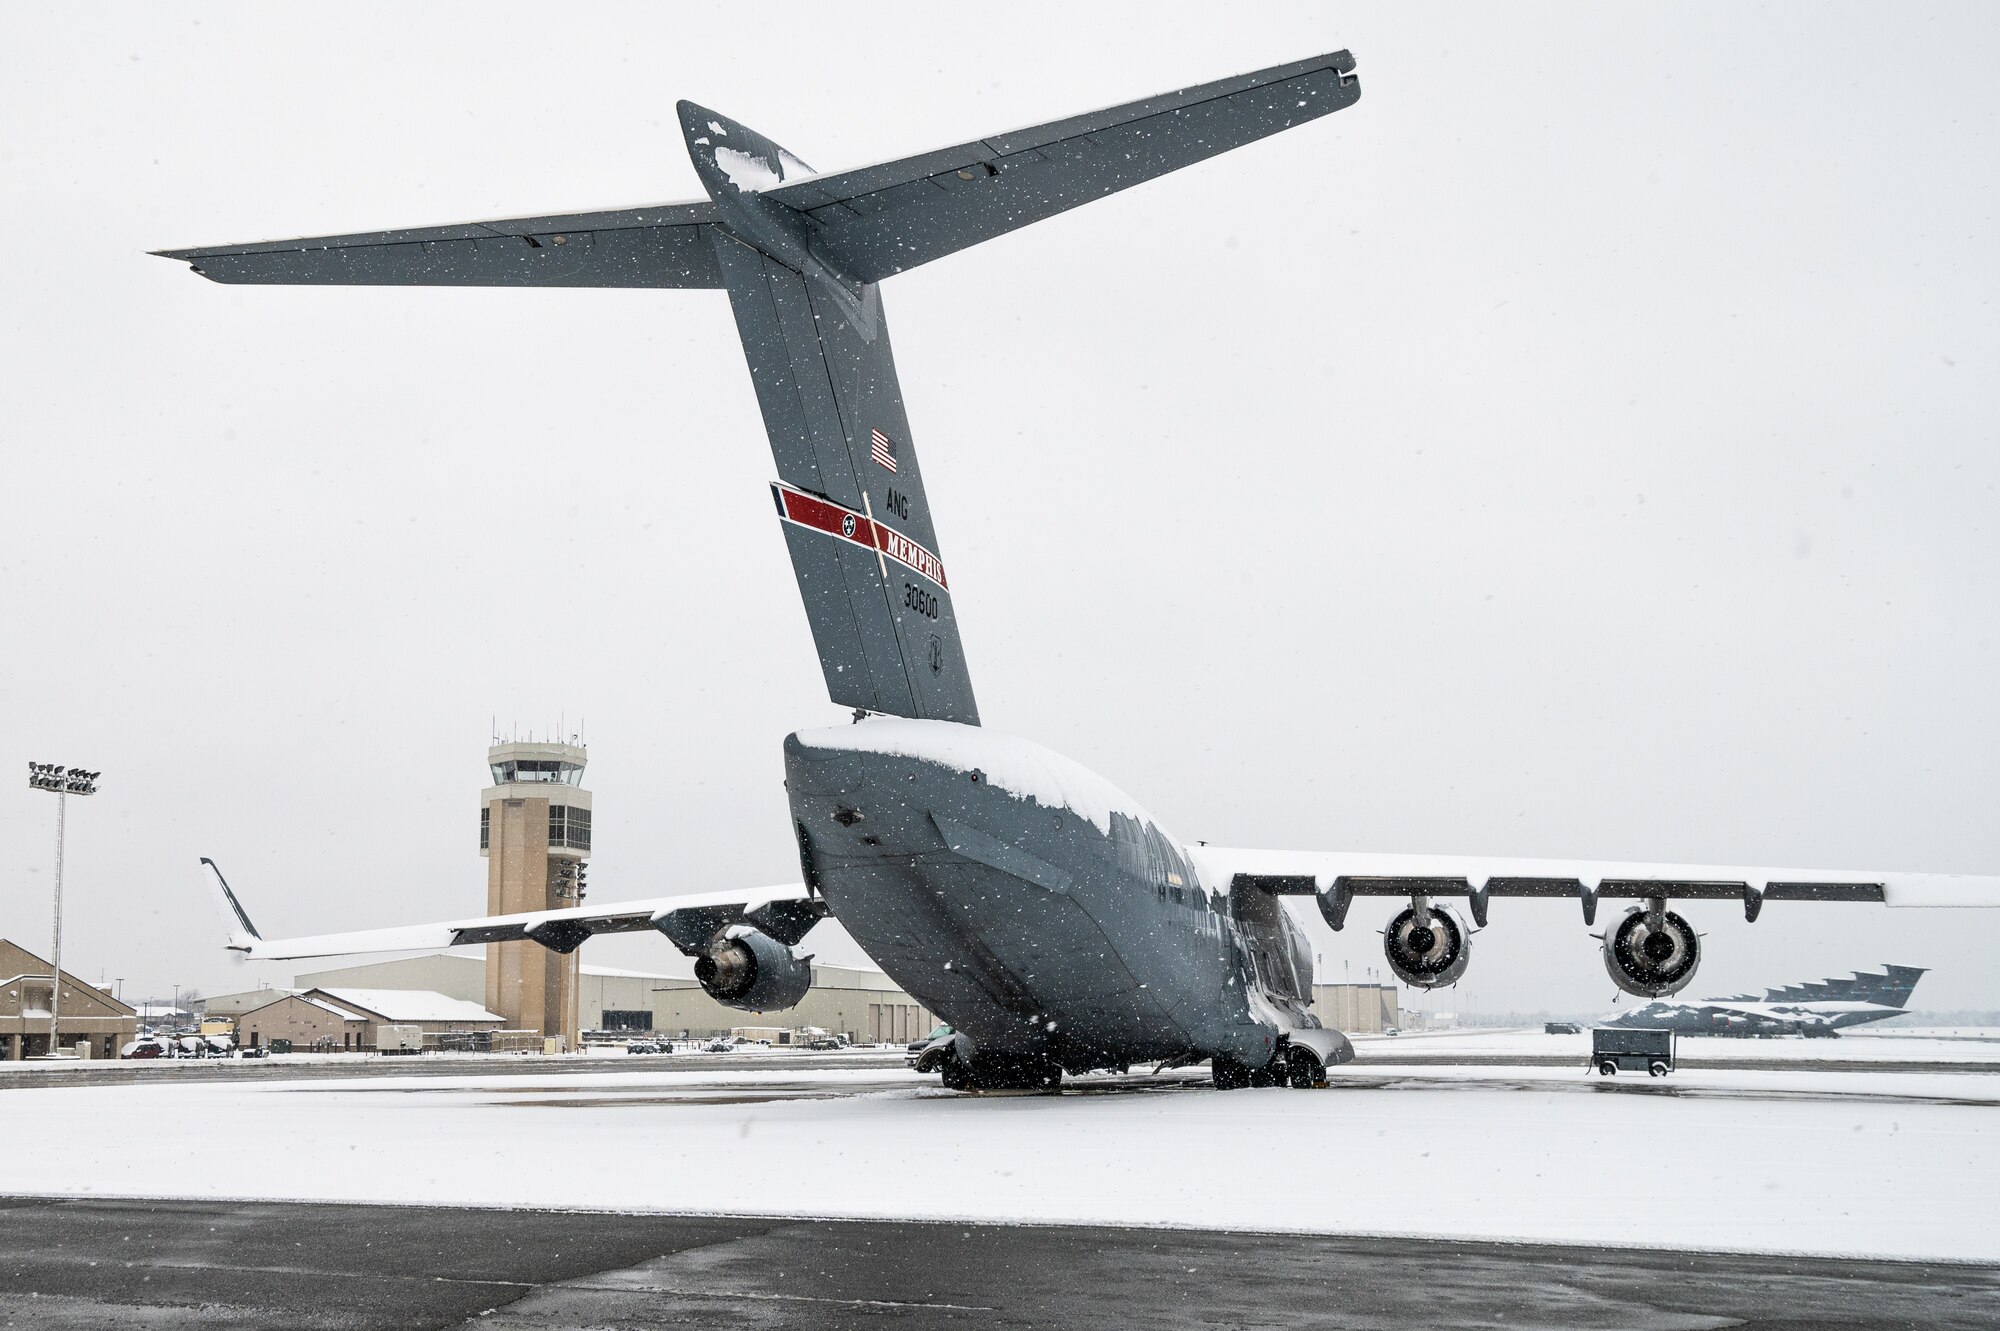 A snow-covered Tennessee Air National Guard C-17 Globemaster III sits on the flight line at Dover Air Force Base, Delaware, Feb. 11, 2021. As snow fell, the base continued normal operations and prepared for additional snowfall. (U.S. Air Force photo by Senior Airman Christopher Quail)